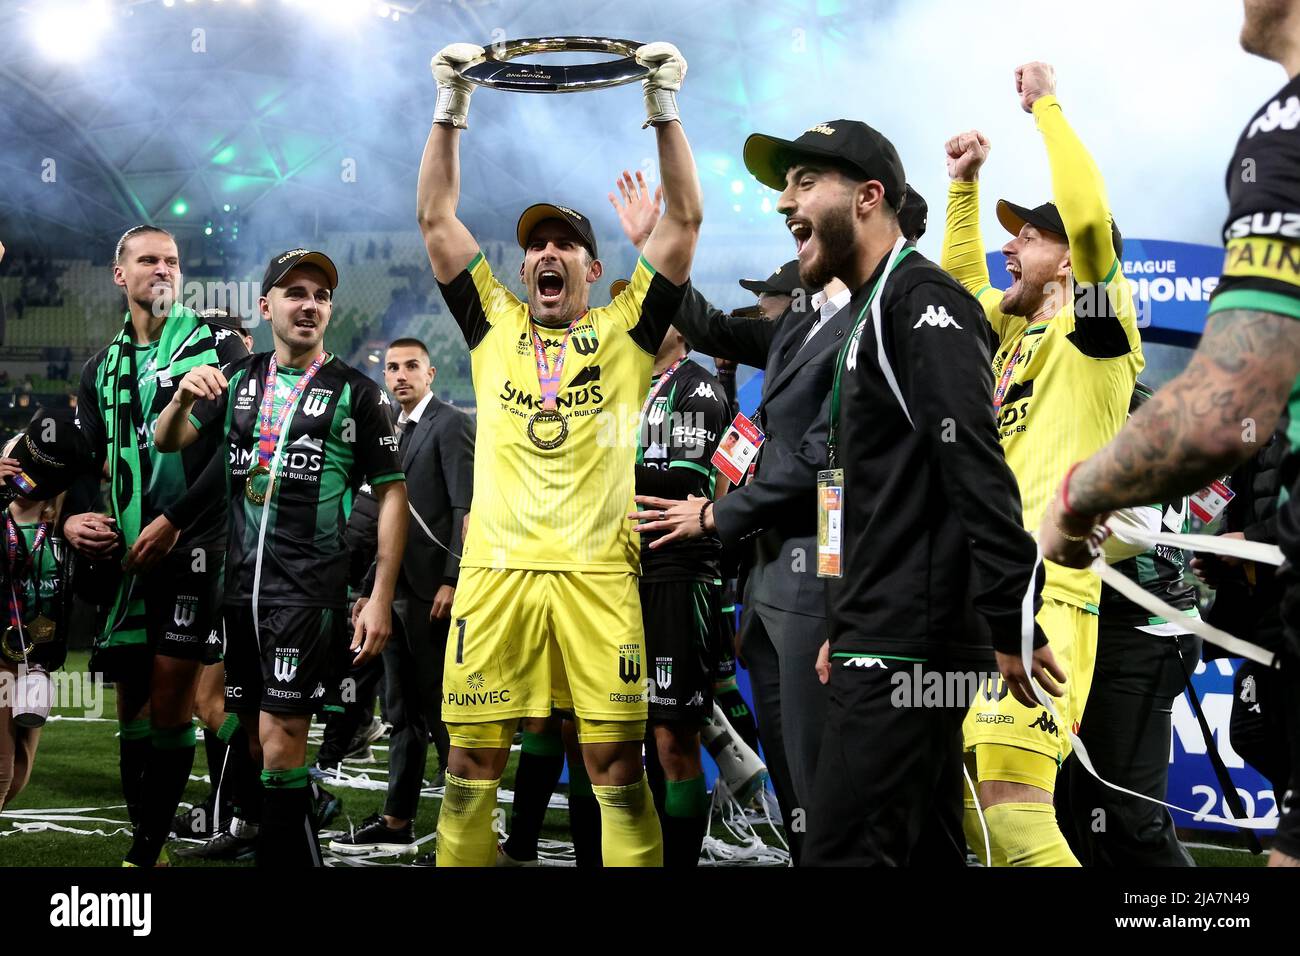 Melbourne, Australia, 28 May, 2022. Western United celebrate winning the Grand Final during the A-League Grand Final soccer match between Melbourne City FC and Western United at AAMI Park on May 28, 2022 in Melbourne, Australia. Credit: Dave Hewison/Speed Media/Alamy Live News Stock Photo